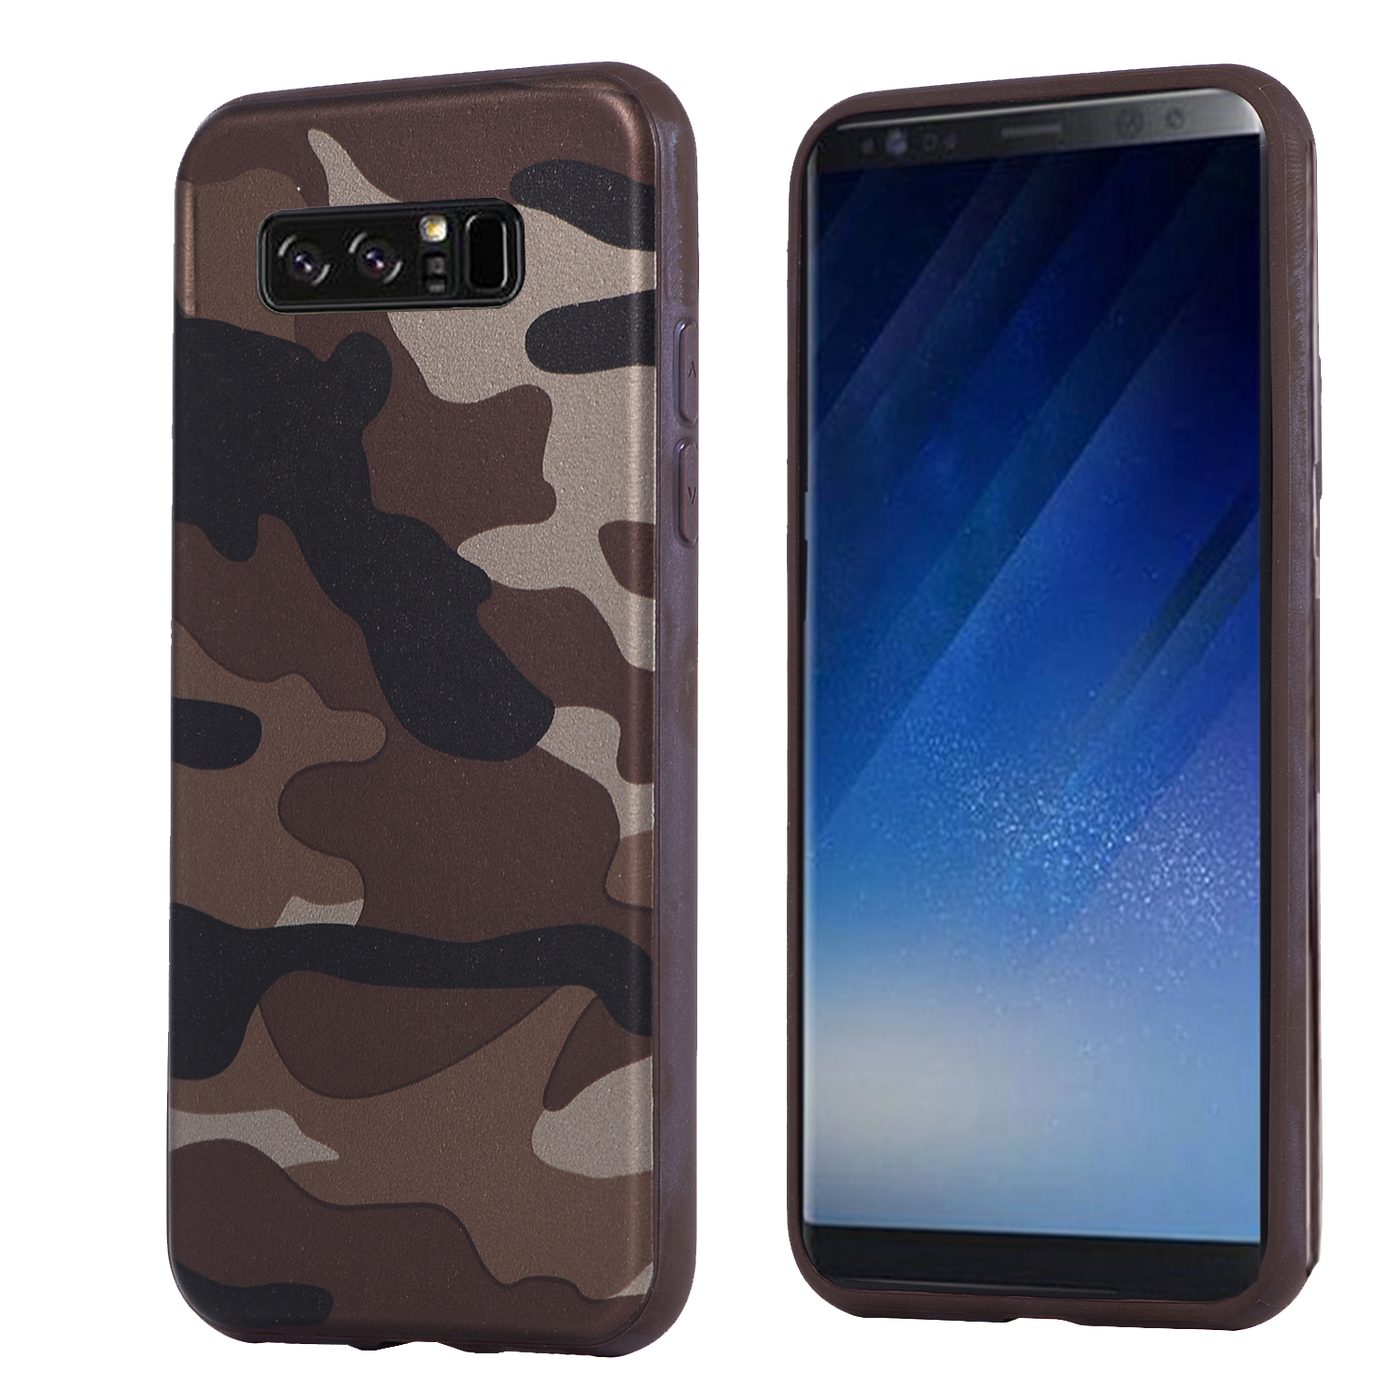 Excelsior Premium Military Design Silicon Back Cover Case for Samsung Galaxy Note 8